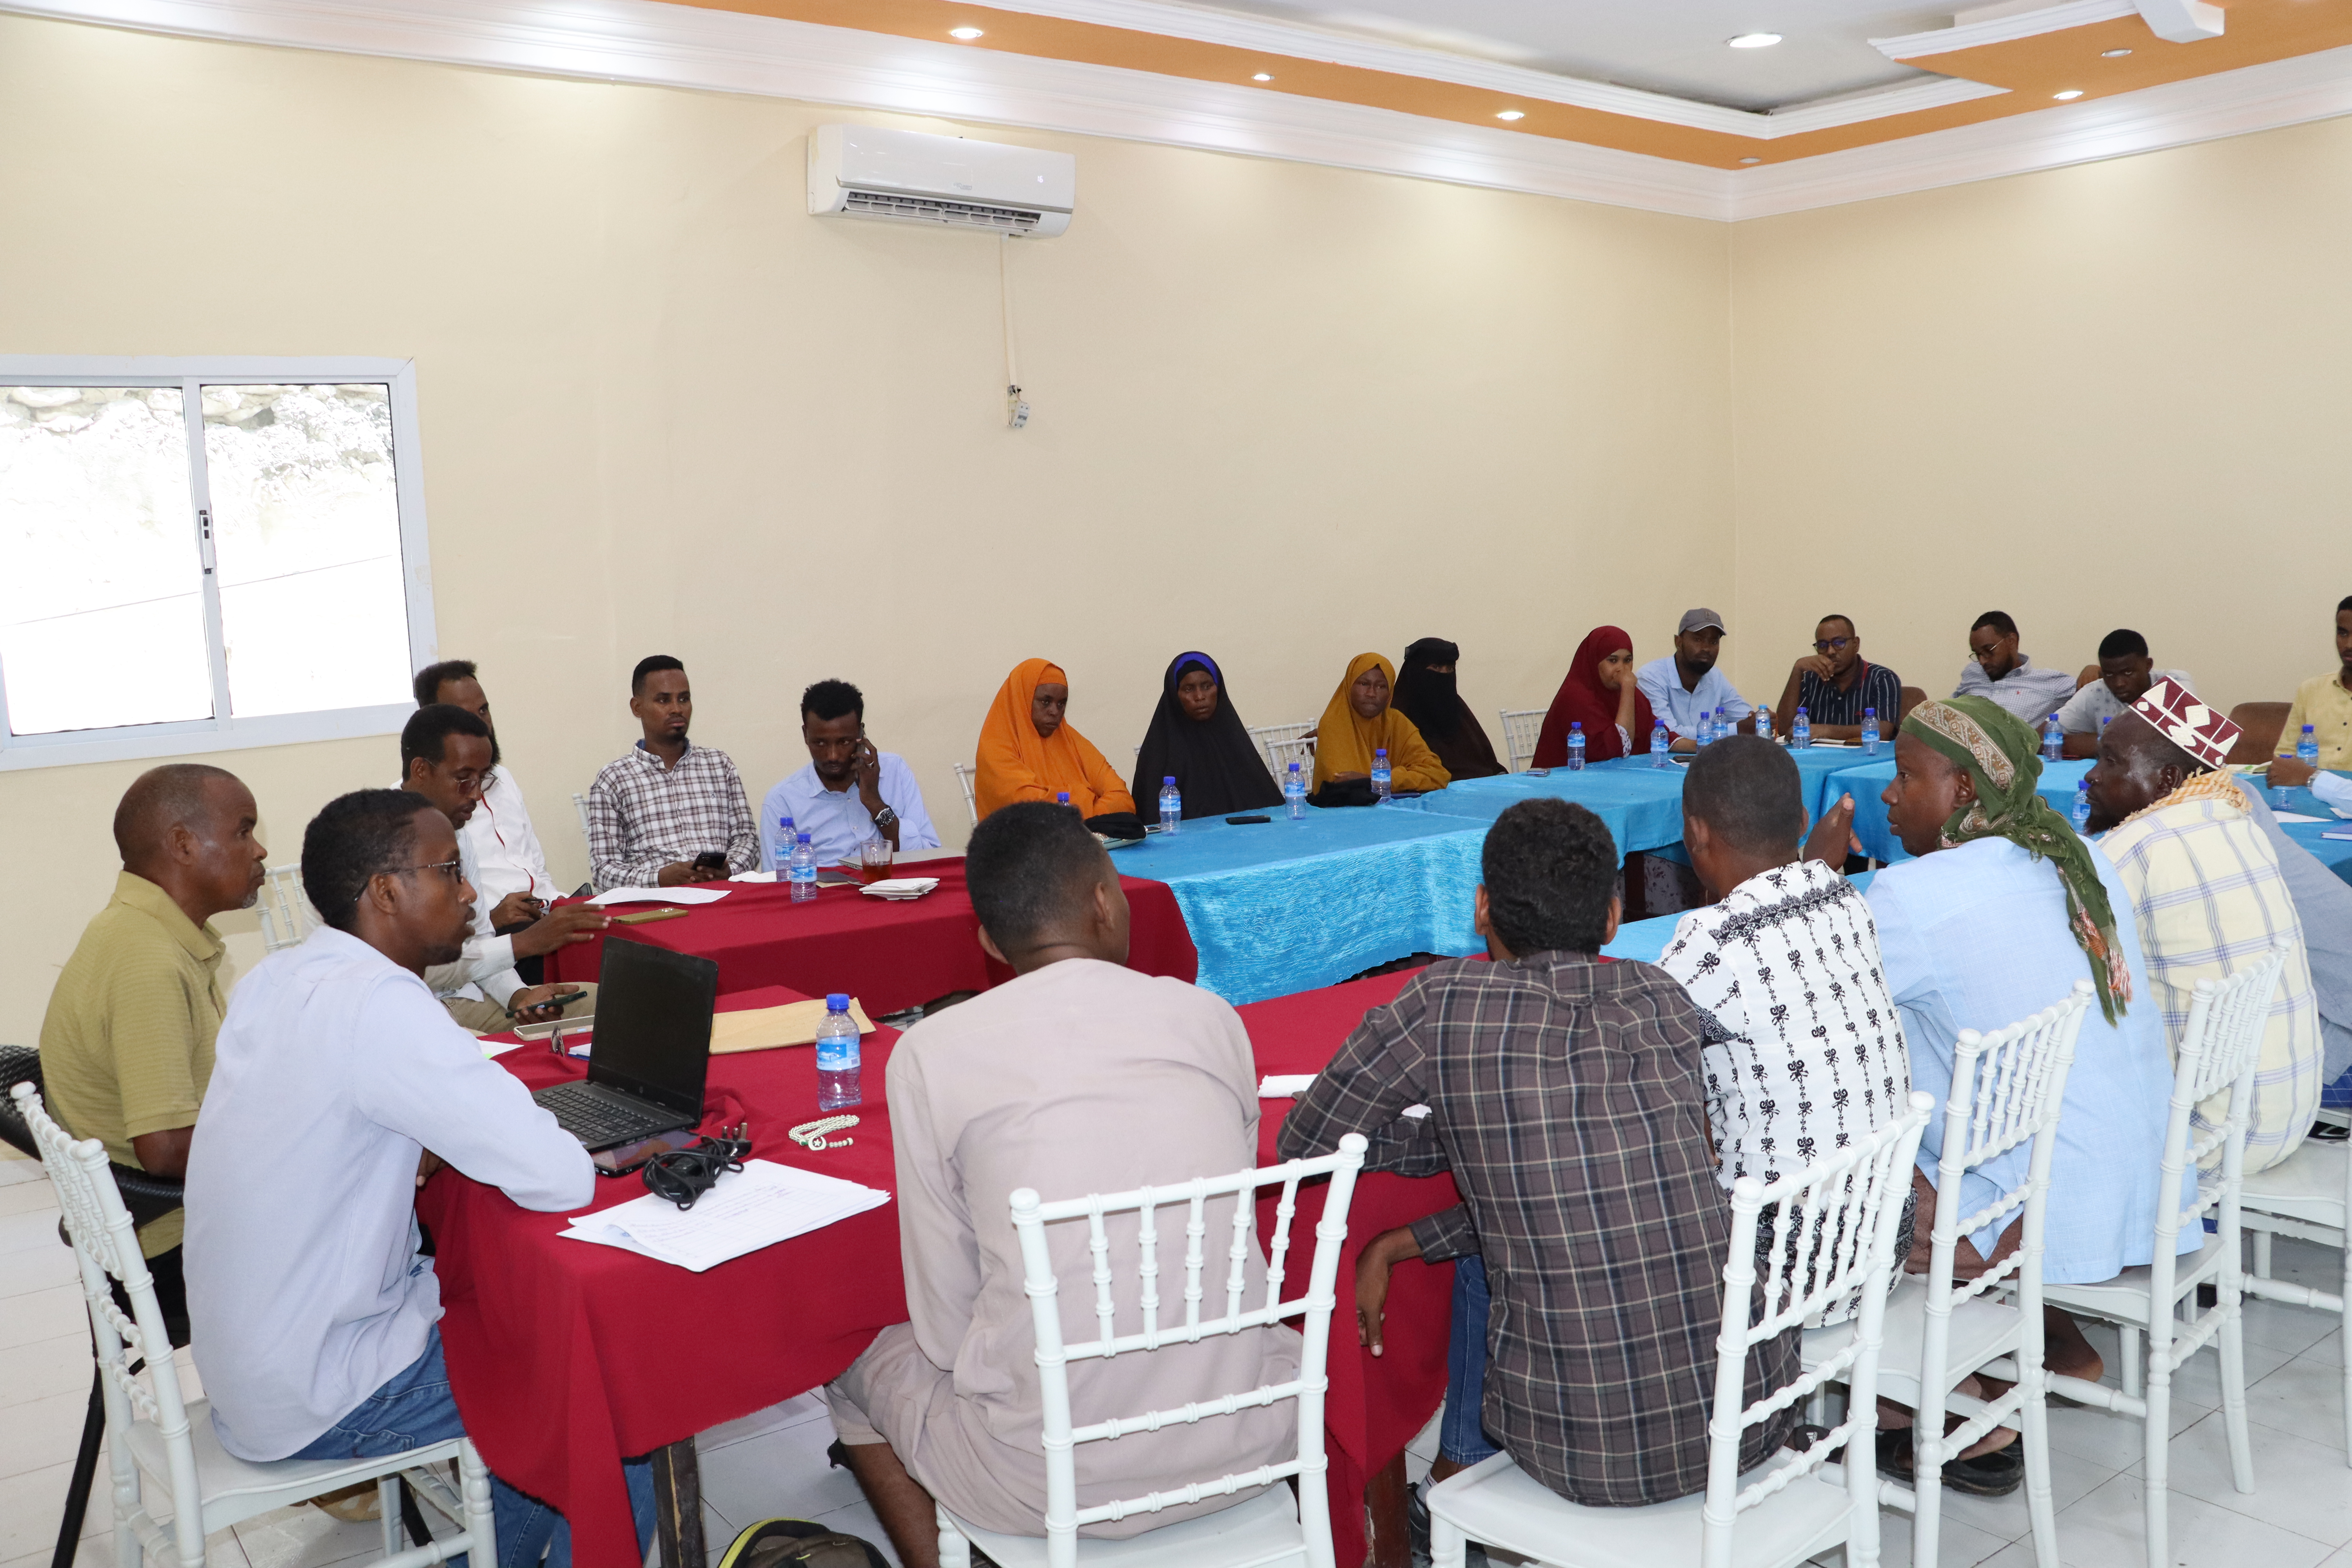 AHCG meeting was attended by KAHDA Implementing Partners, Local authorities, and IDP representatives, chaired by SCC; The aim was to coordinate effective and efficient responses, share information, and identify gaps.